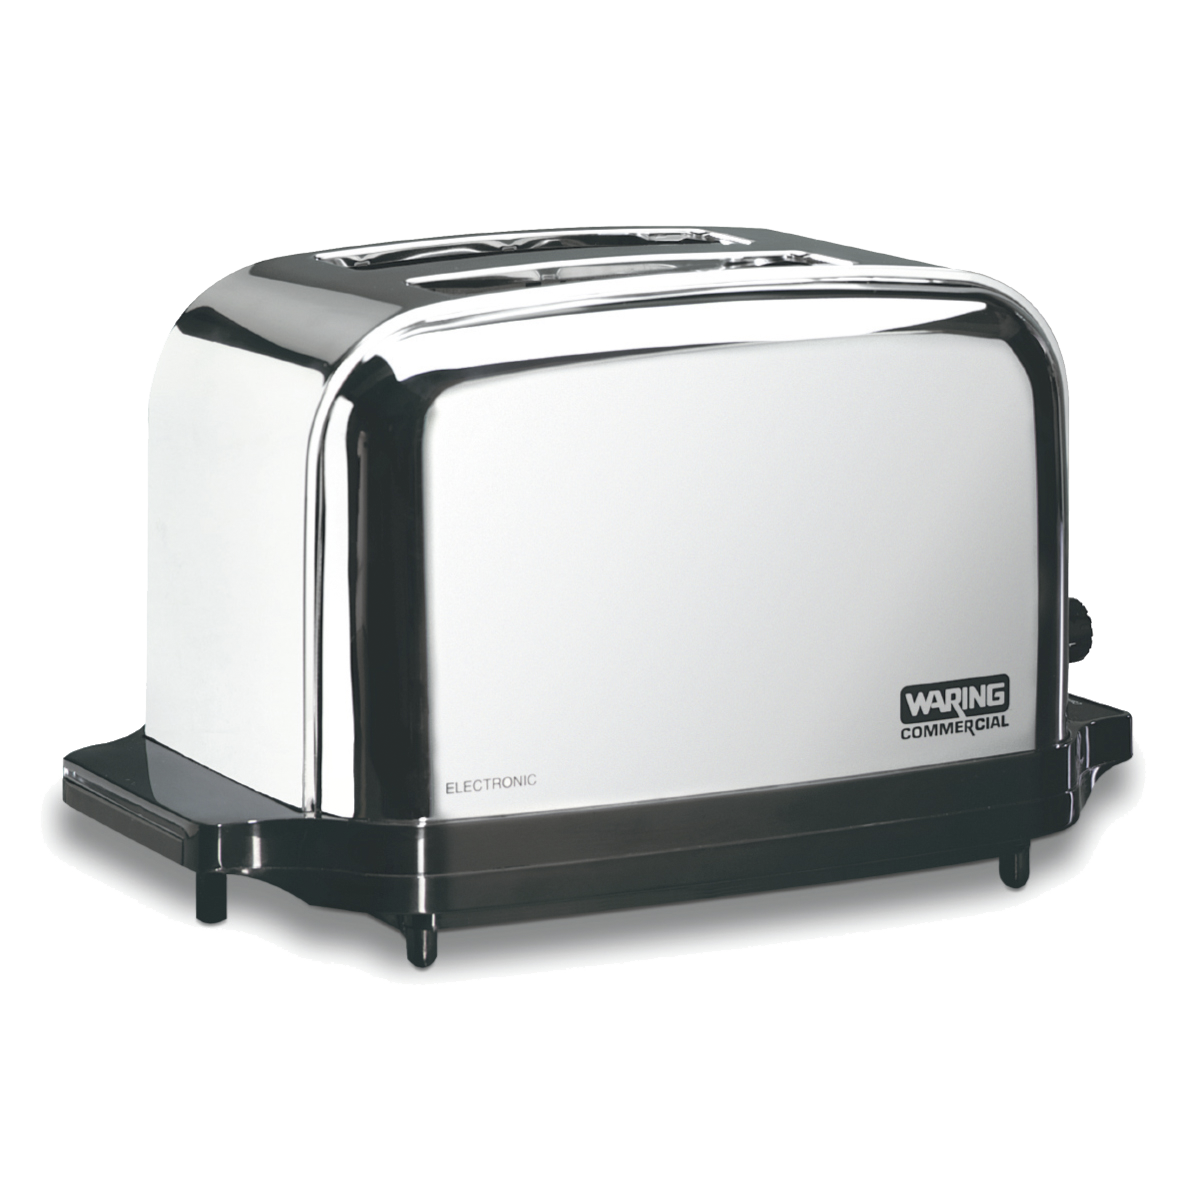 https://www.waringcommercialproducts.com/files/products/wct702-waring-toaster-main.png